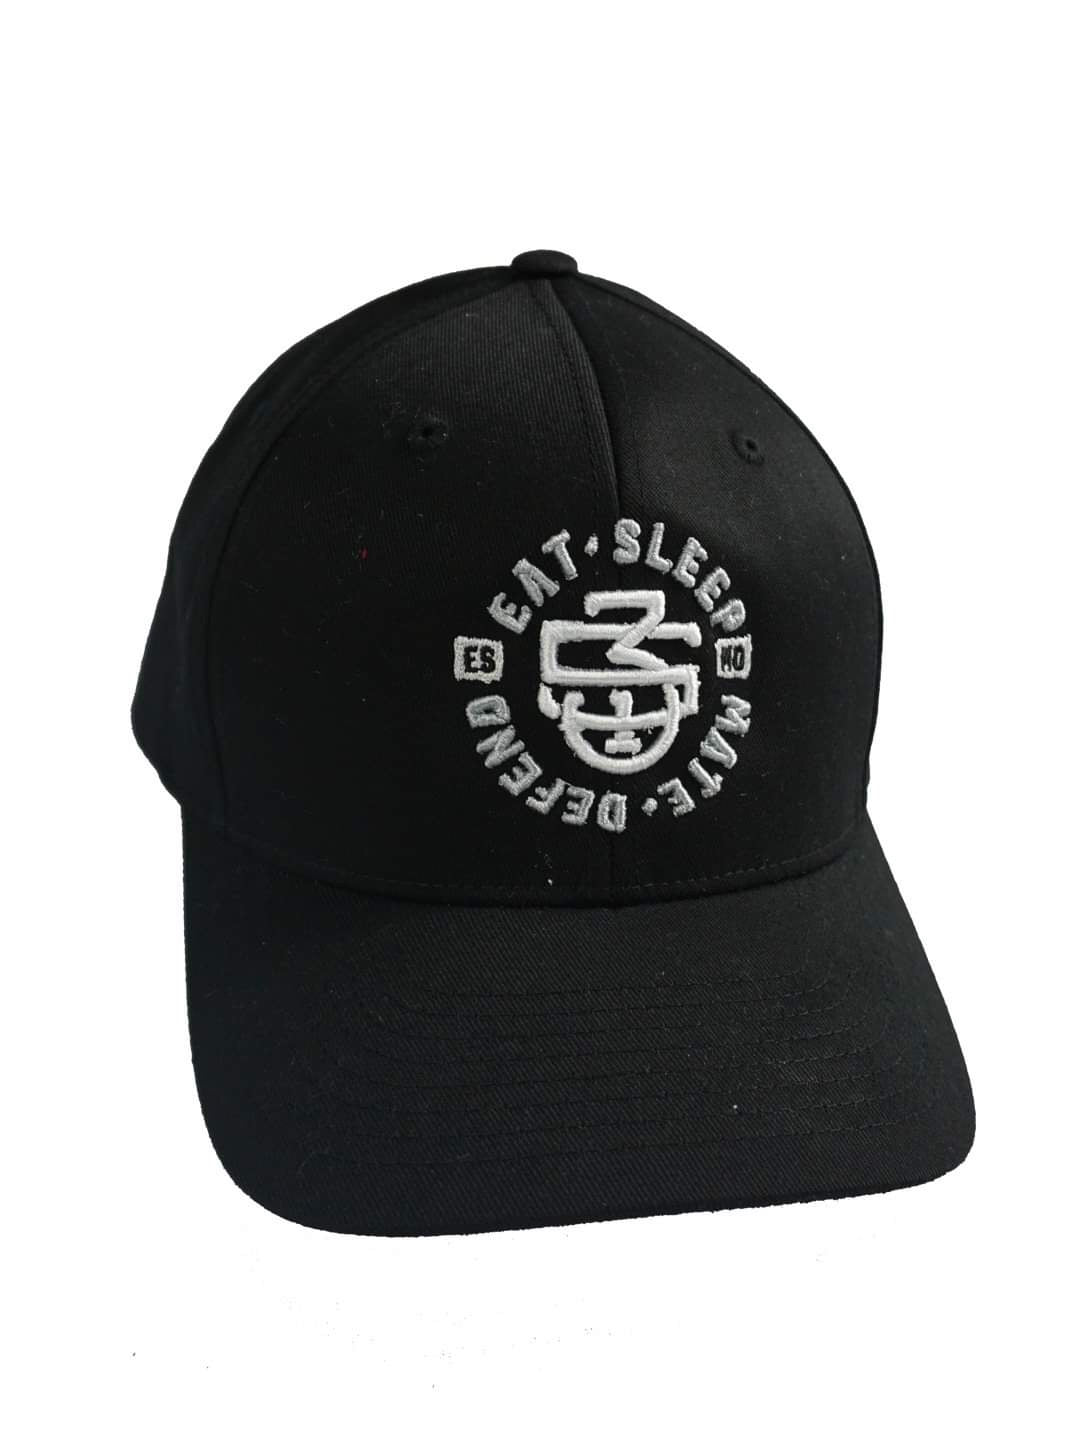 E.S.M.D. Fitted Hat